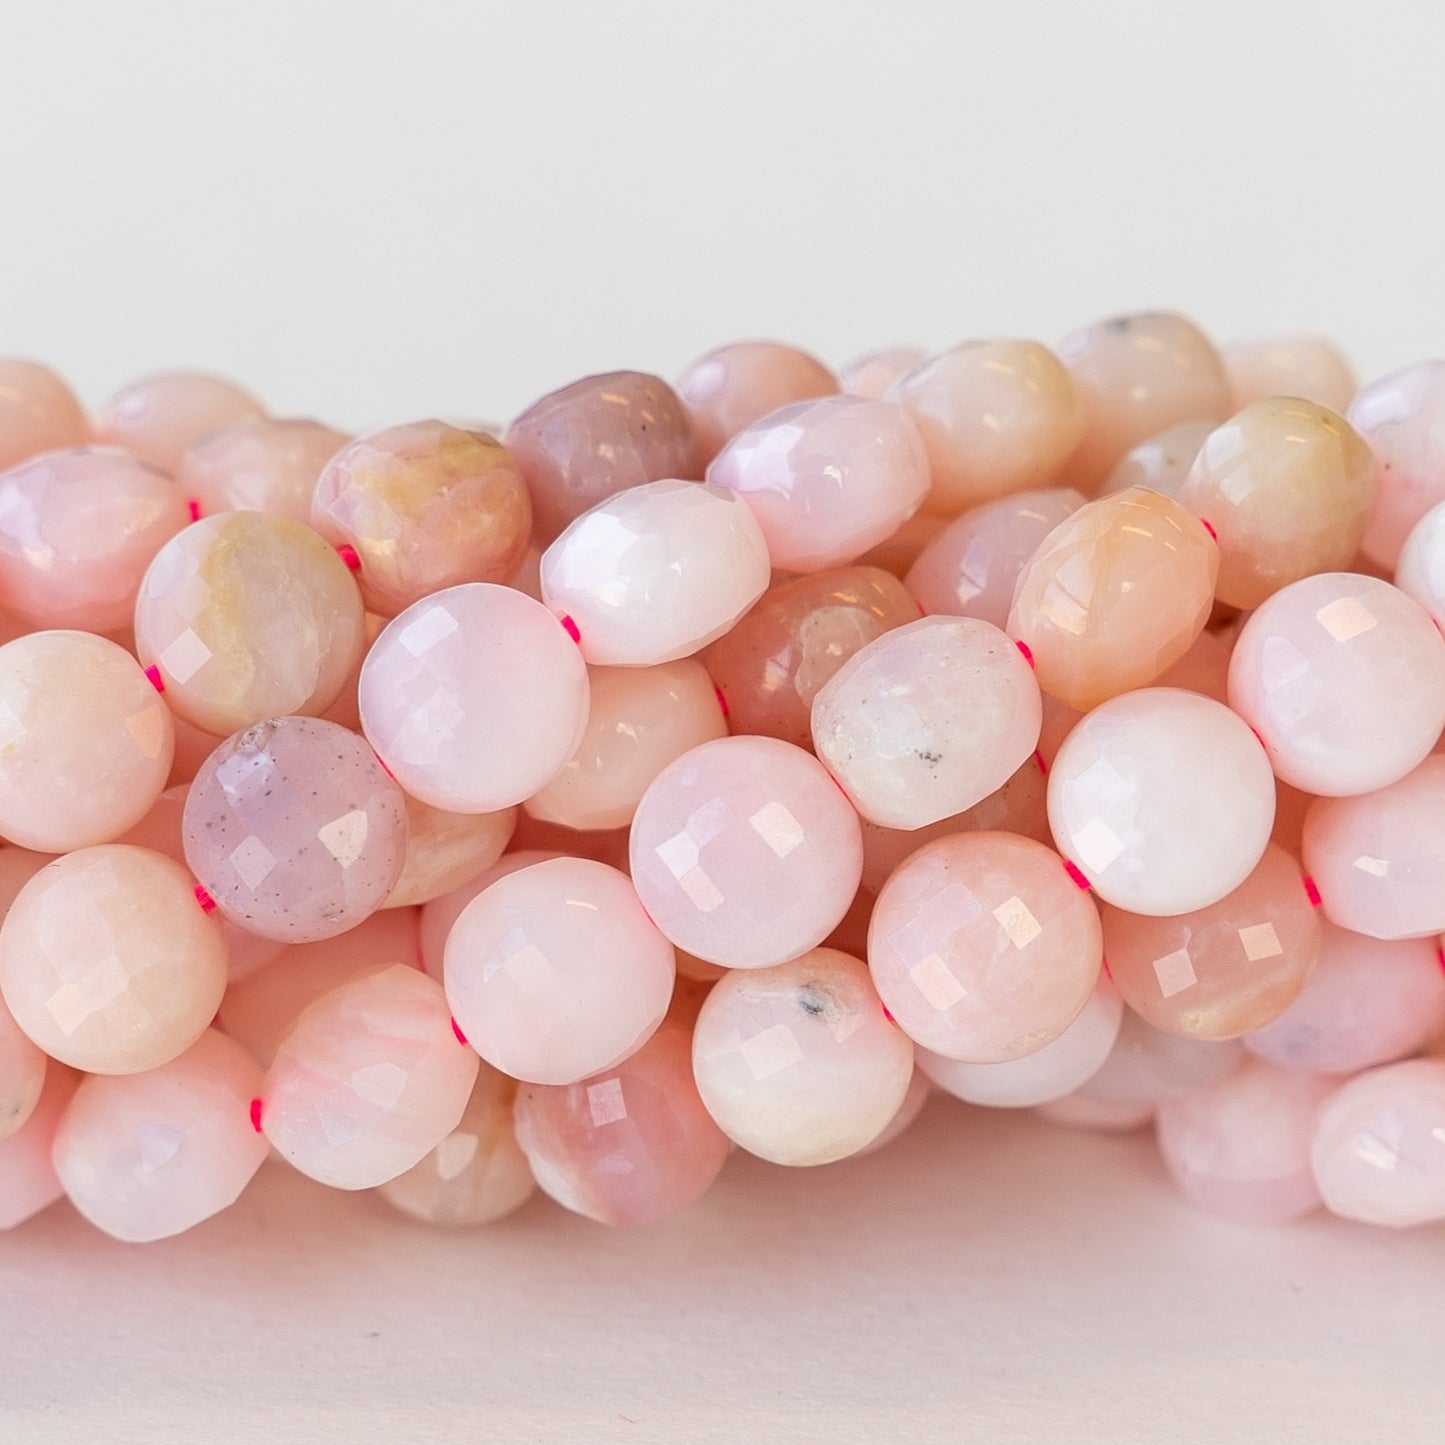 6mm Peruvian Faceted Pink Opal Coin Beads - 16 Inches